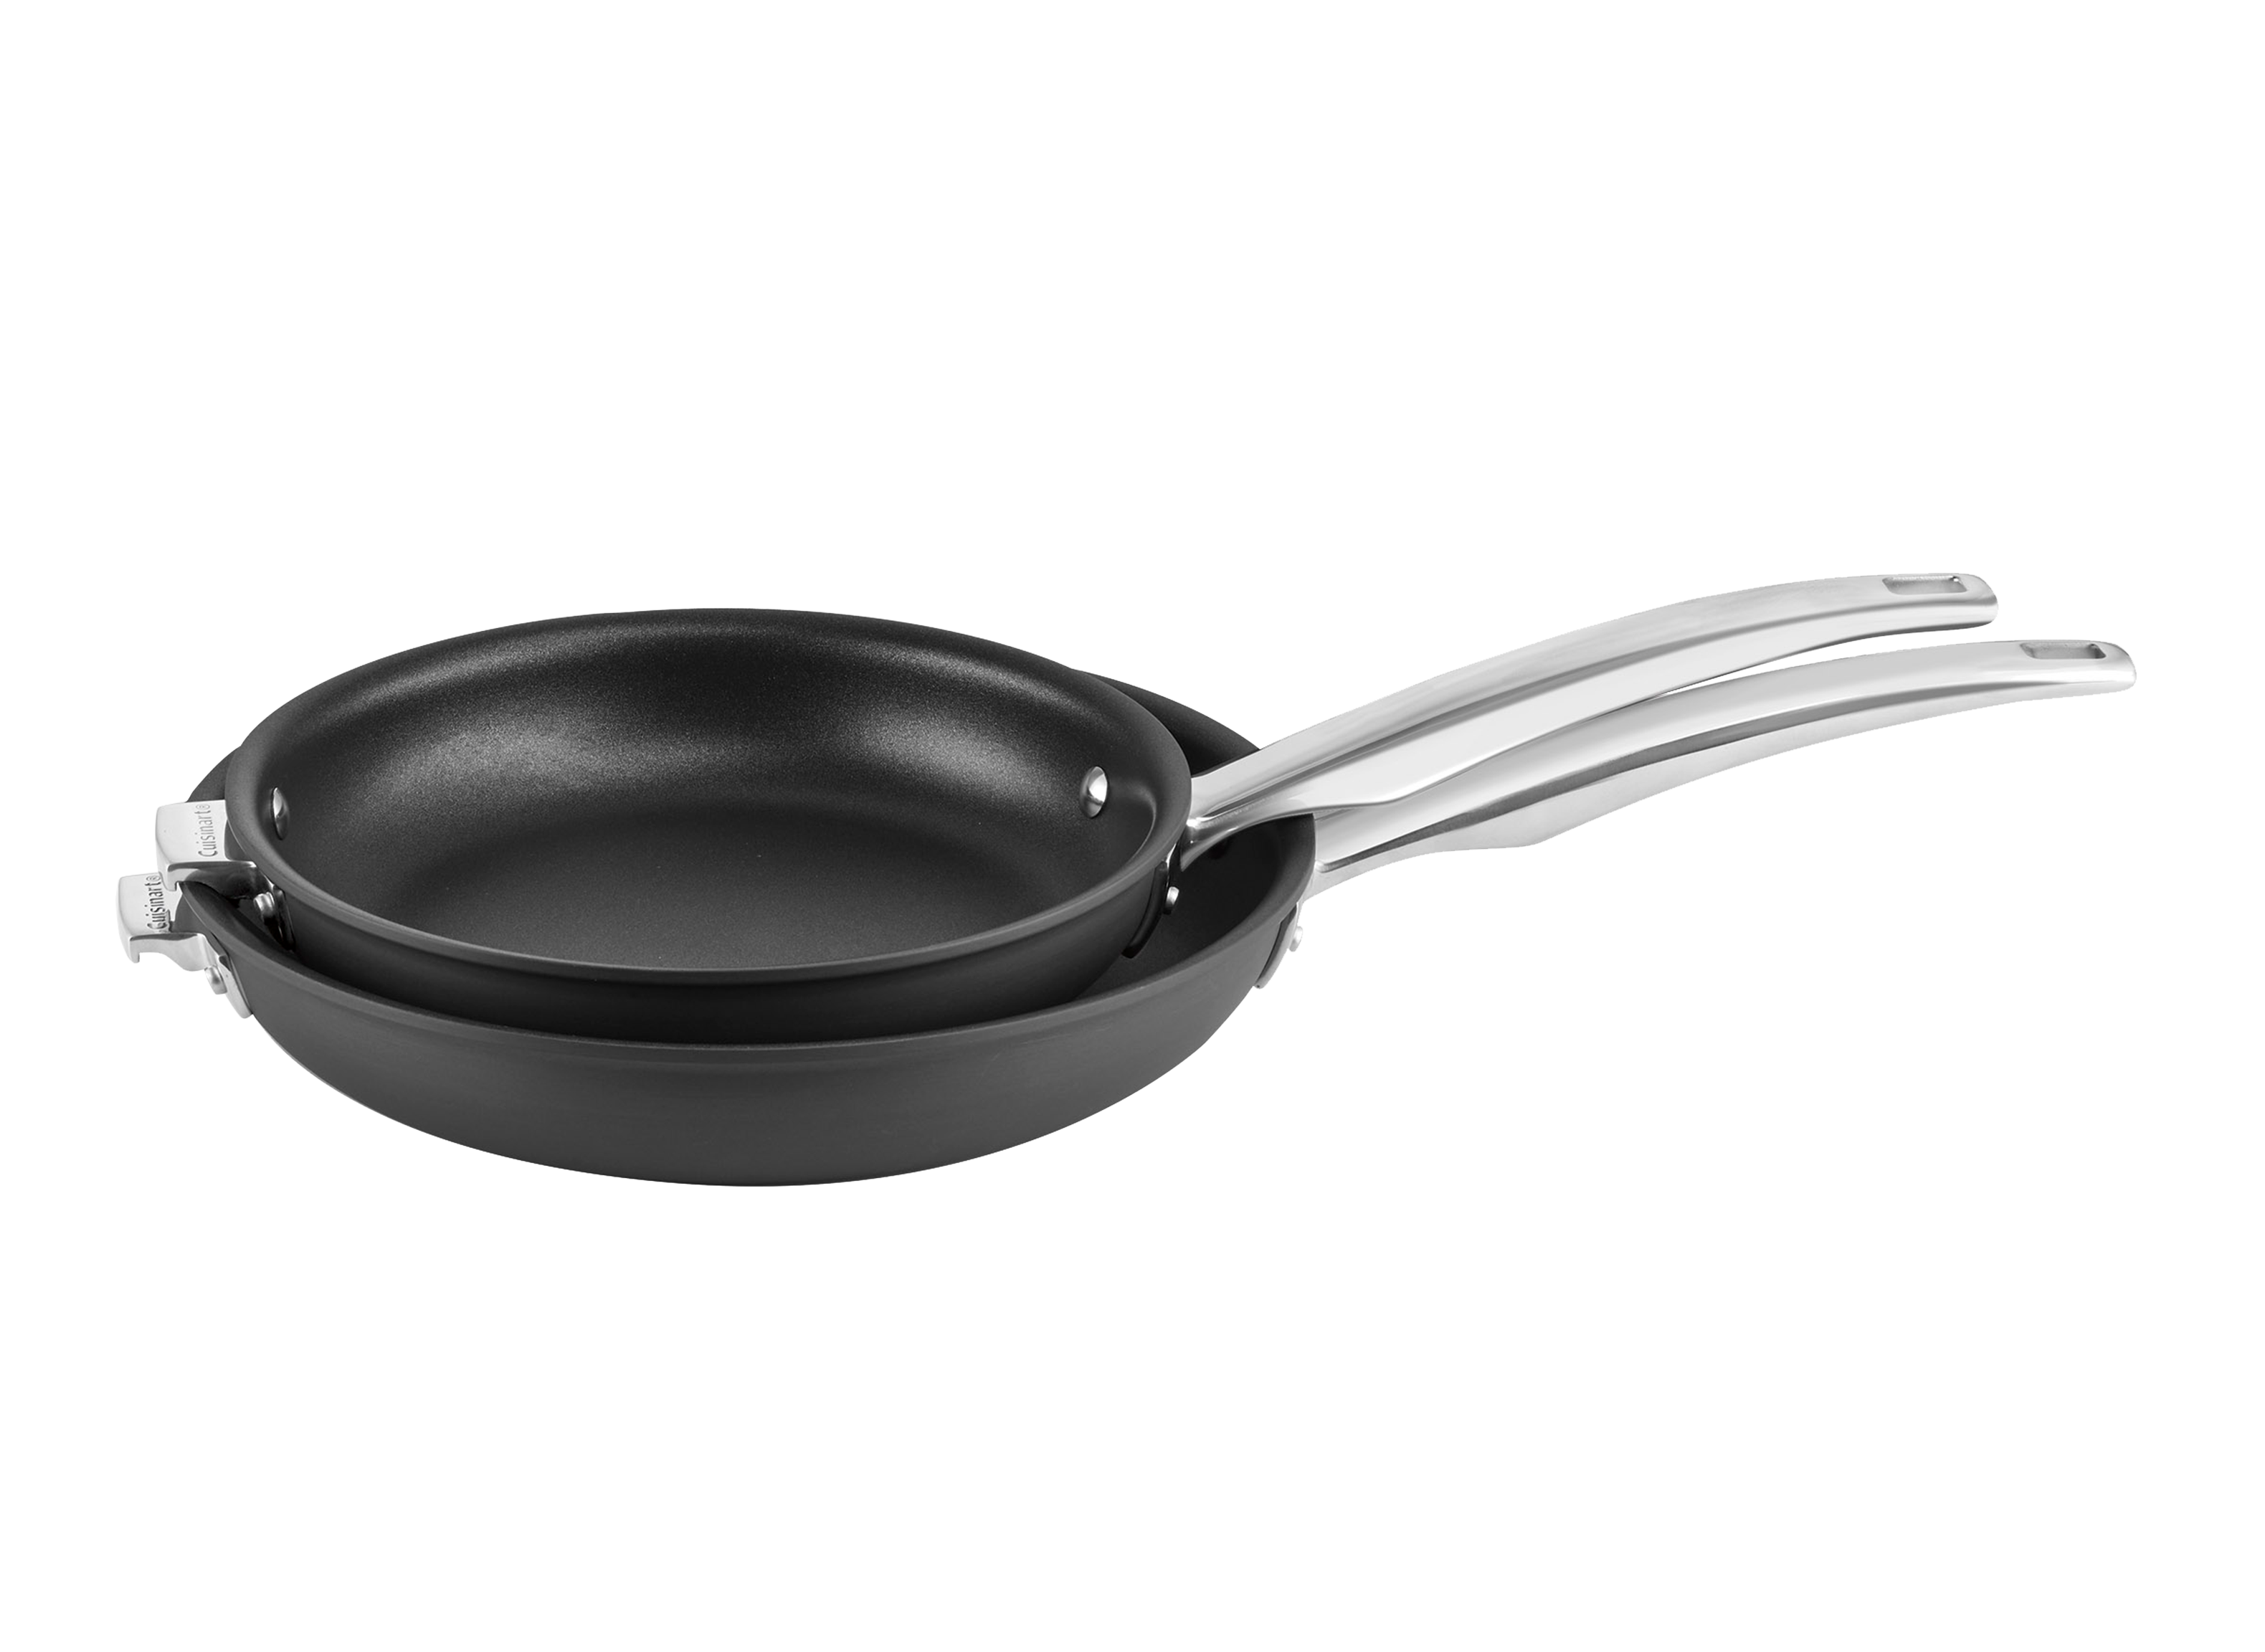 https://crdms.images.consumerreports.org/prod/products/cr/models/407659-frying-pans-nonstick-cuisinart-n6122-810-smartnest-hard-anodized-10032185.png